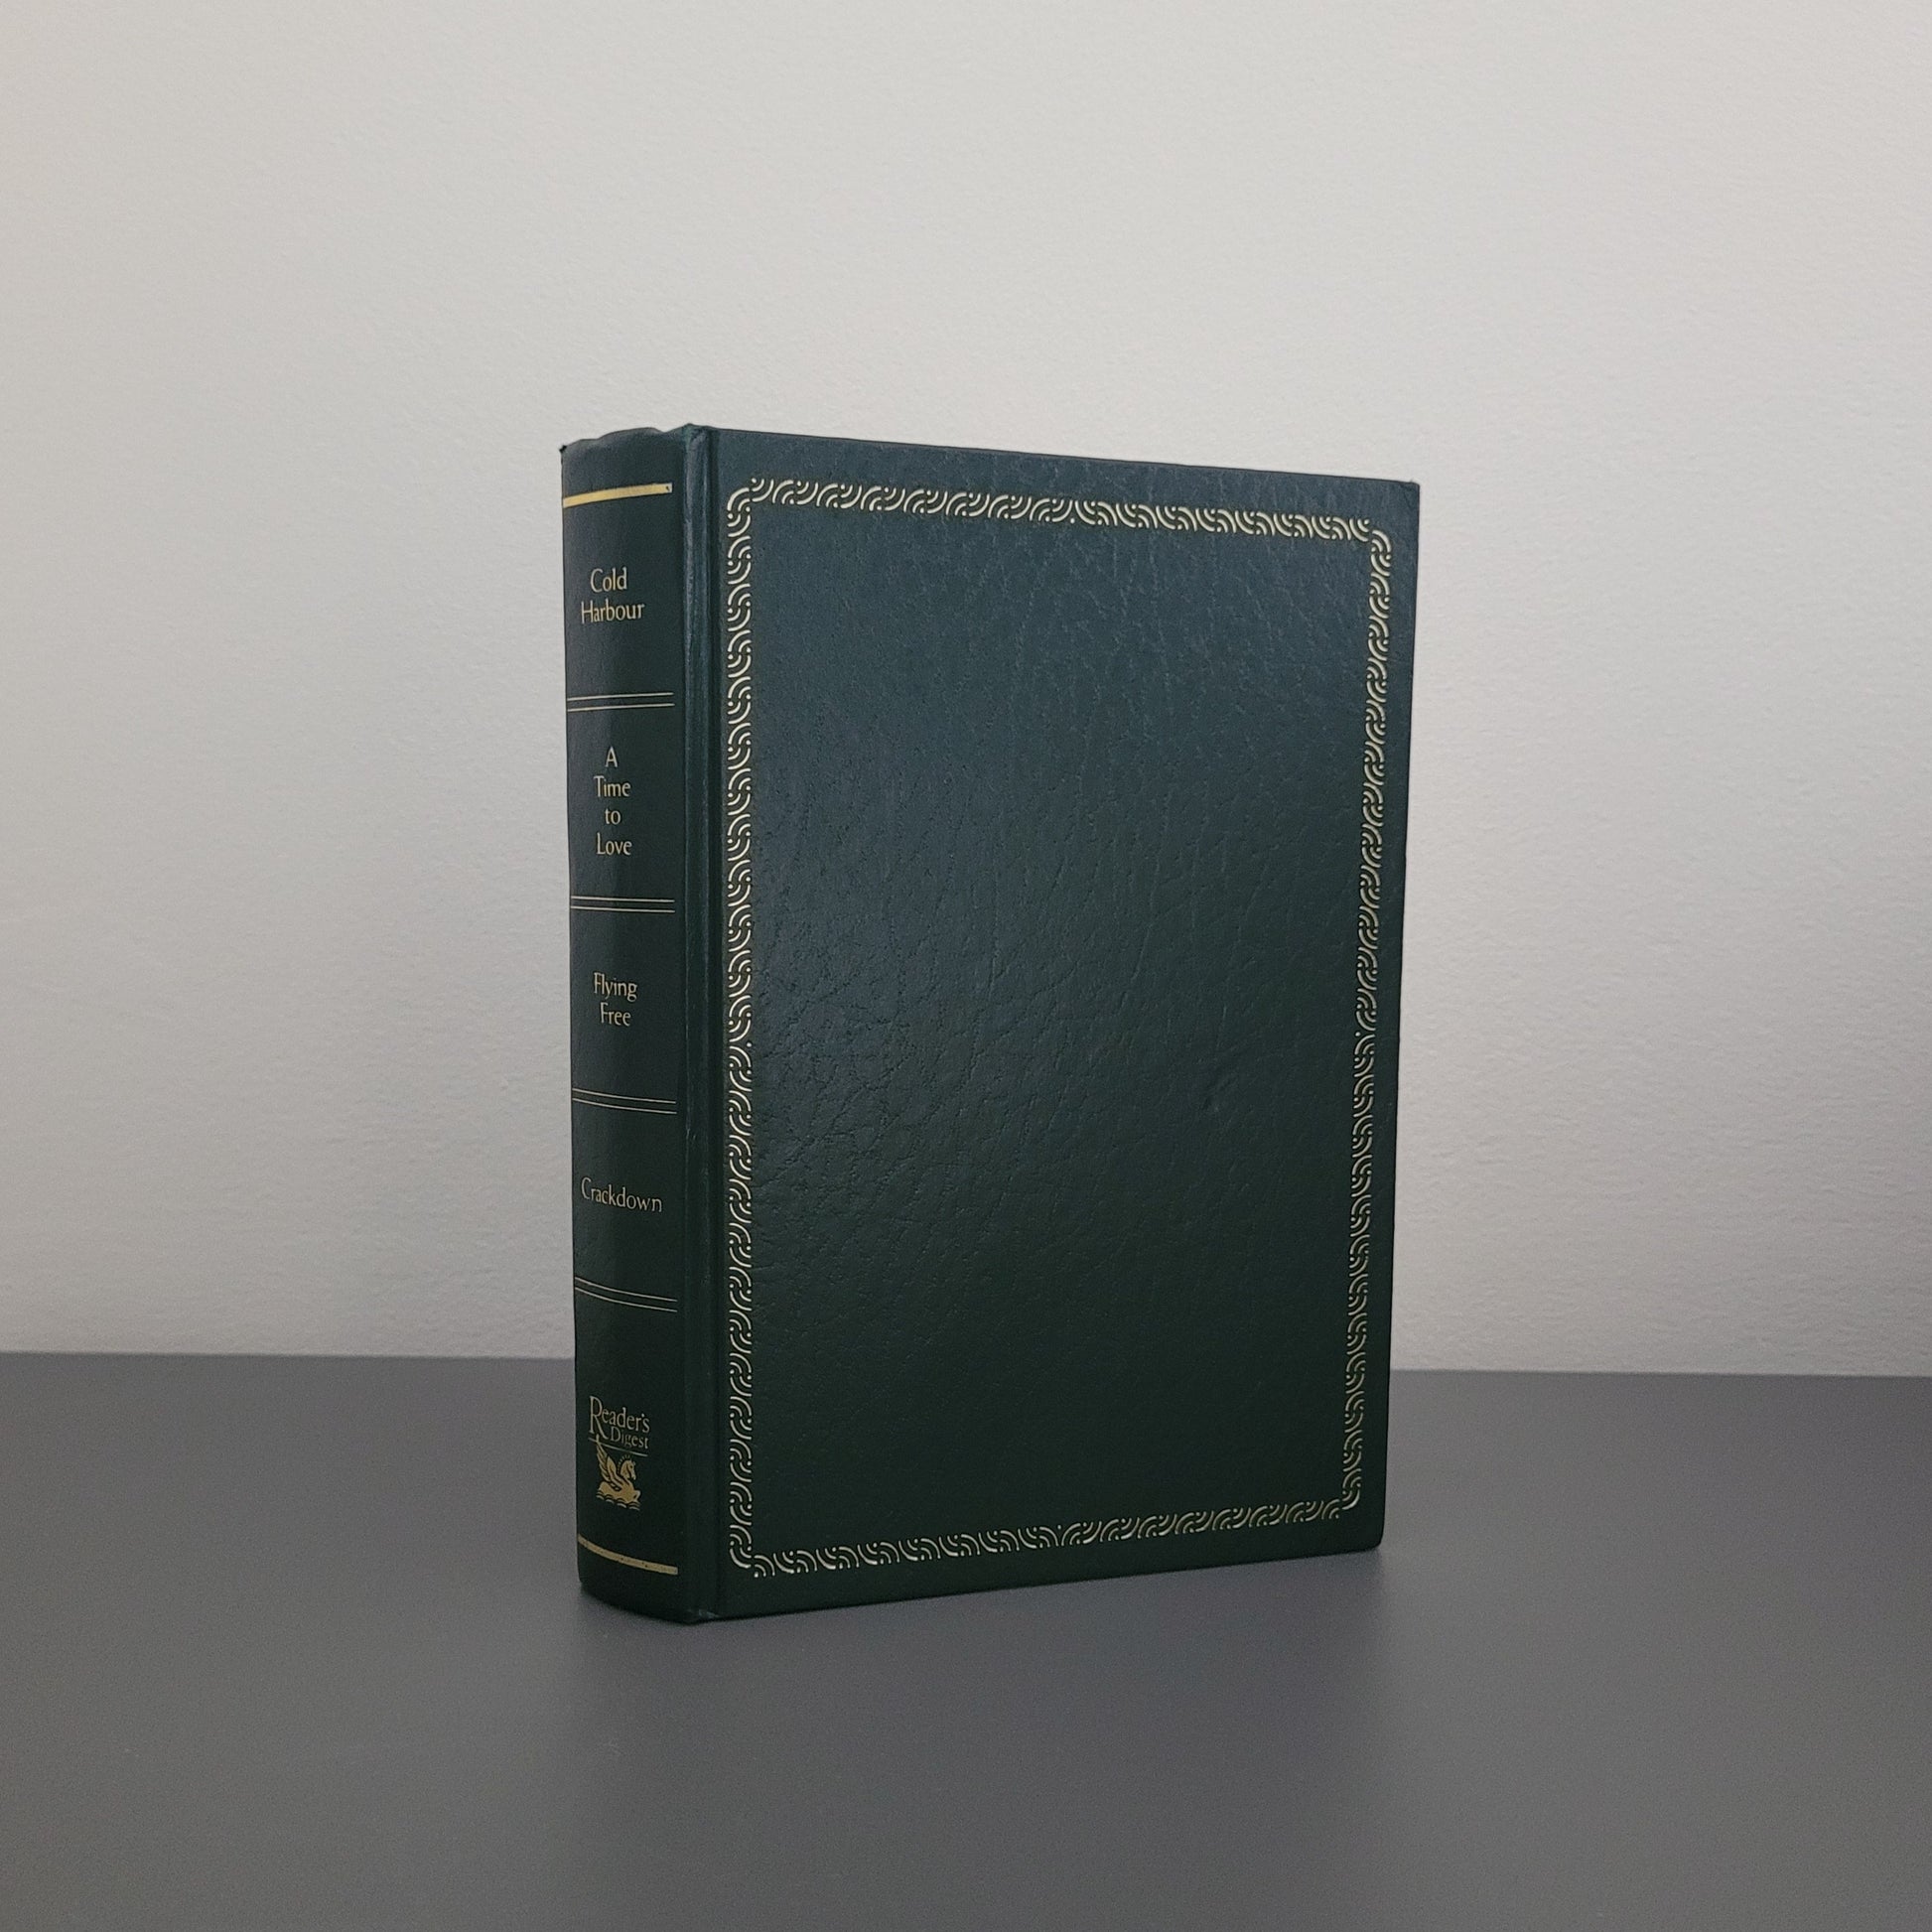 The front cover of the book fold - a dark green hardback book with a golden border